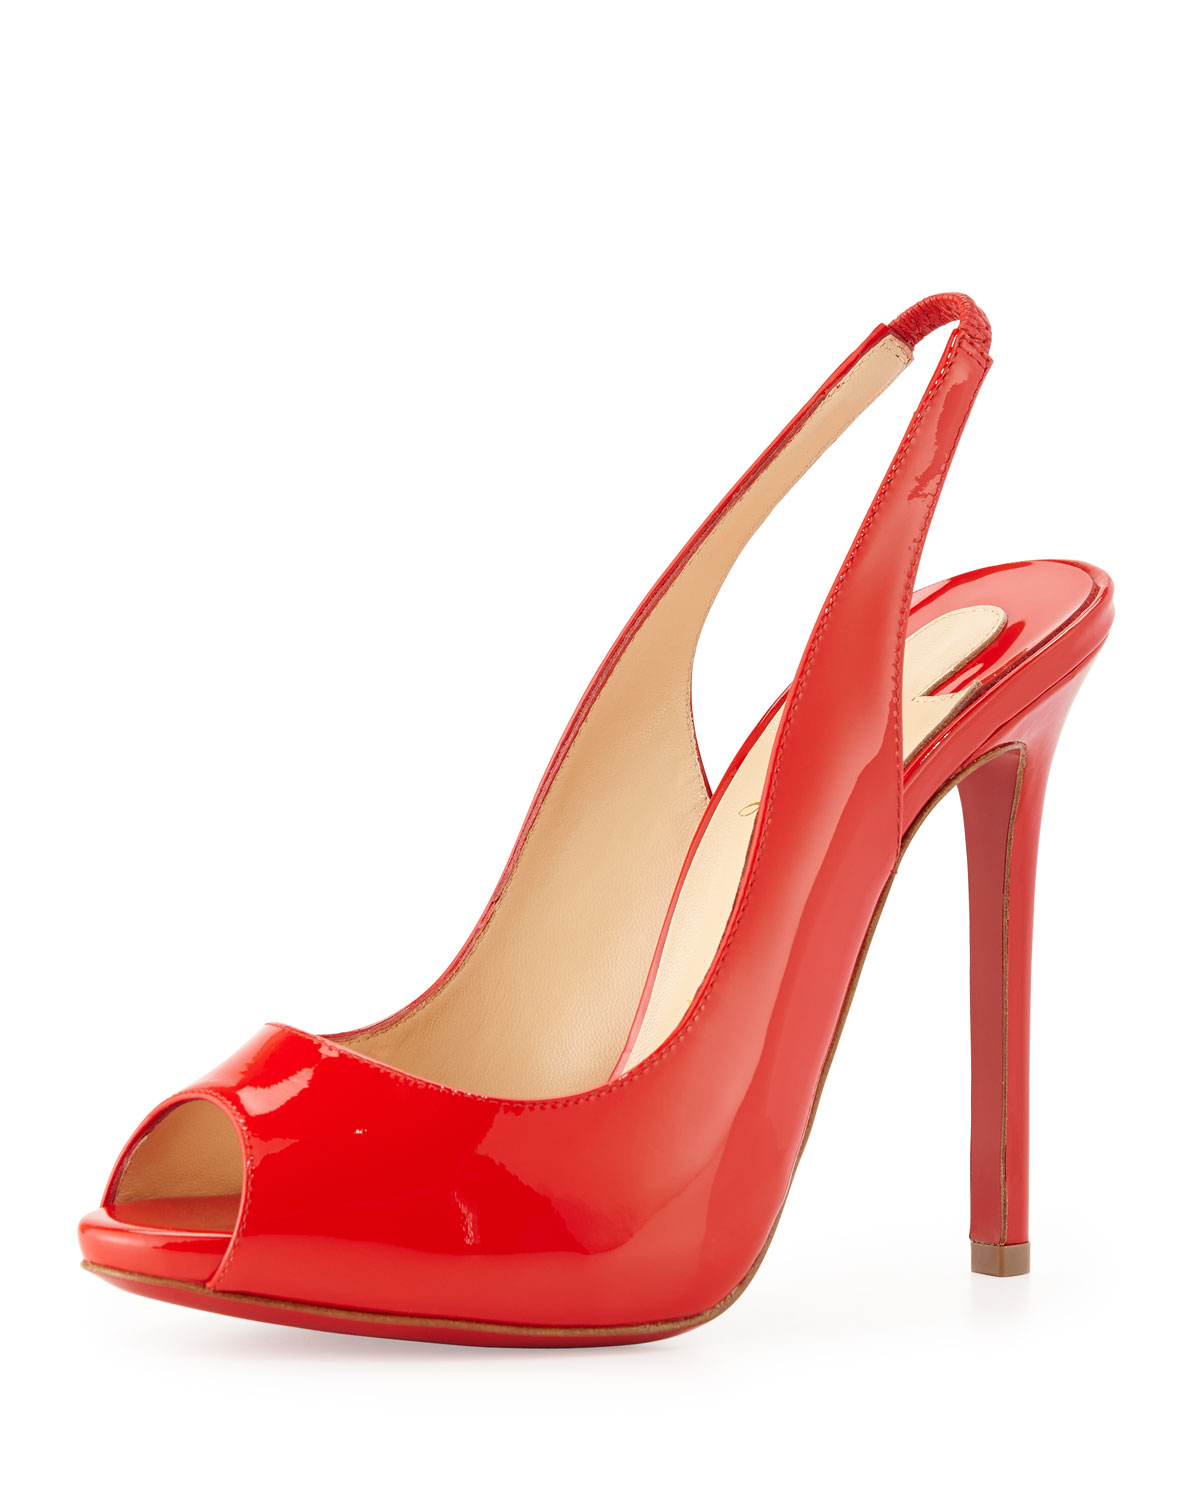 Christian louboutin Flo Sling Patent Peeptoe Red Sole Pump Red in ...  